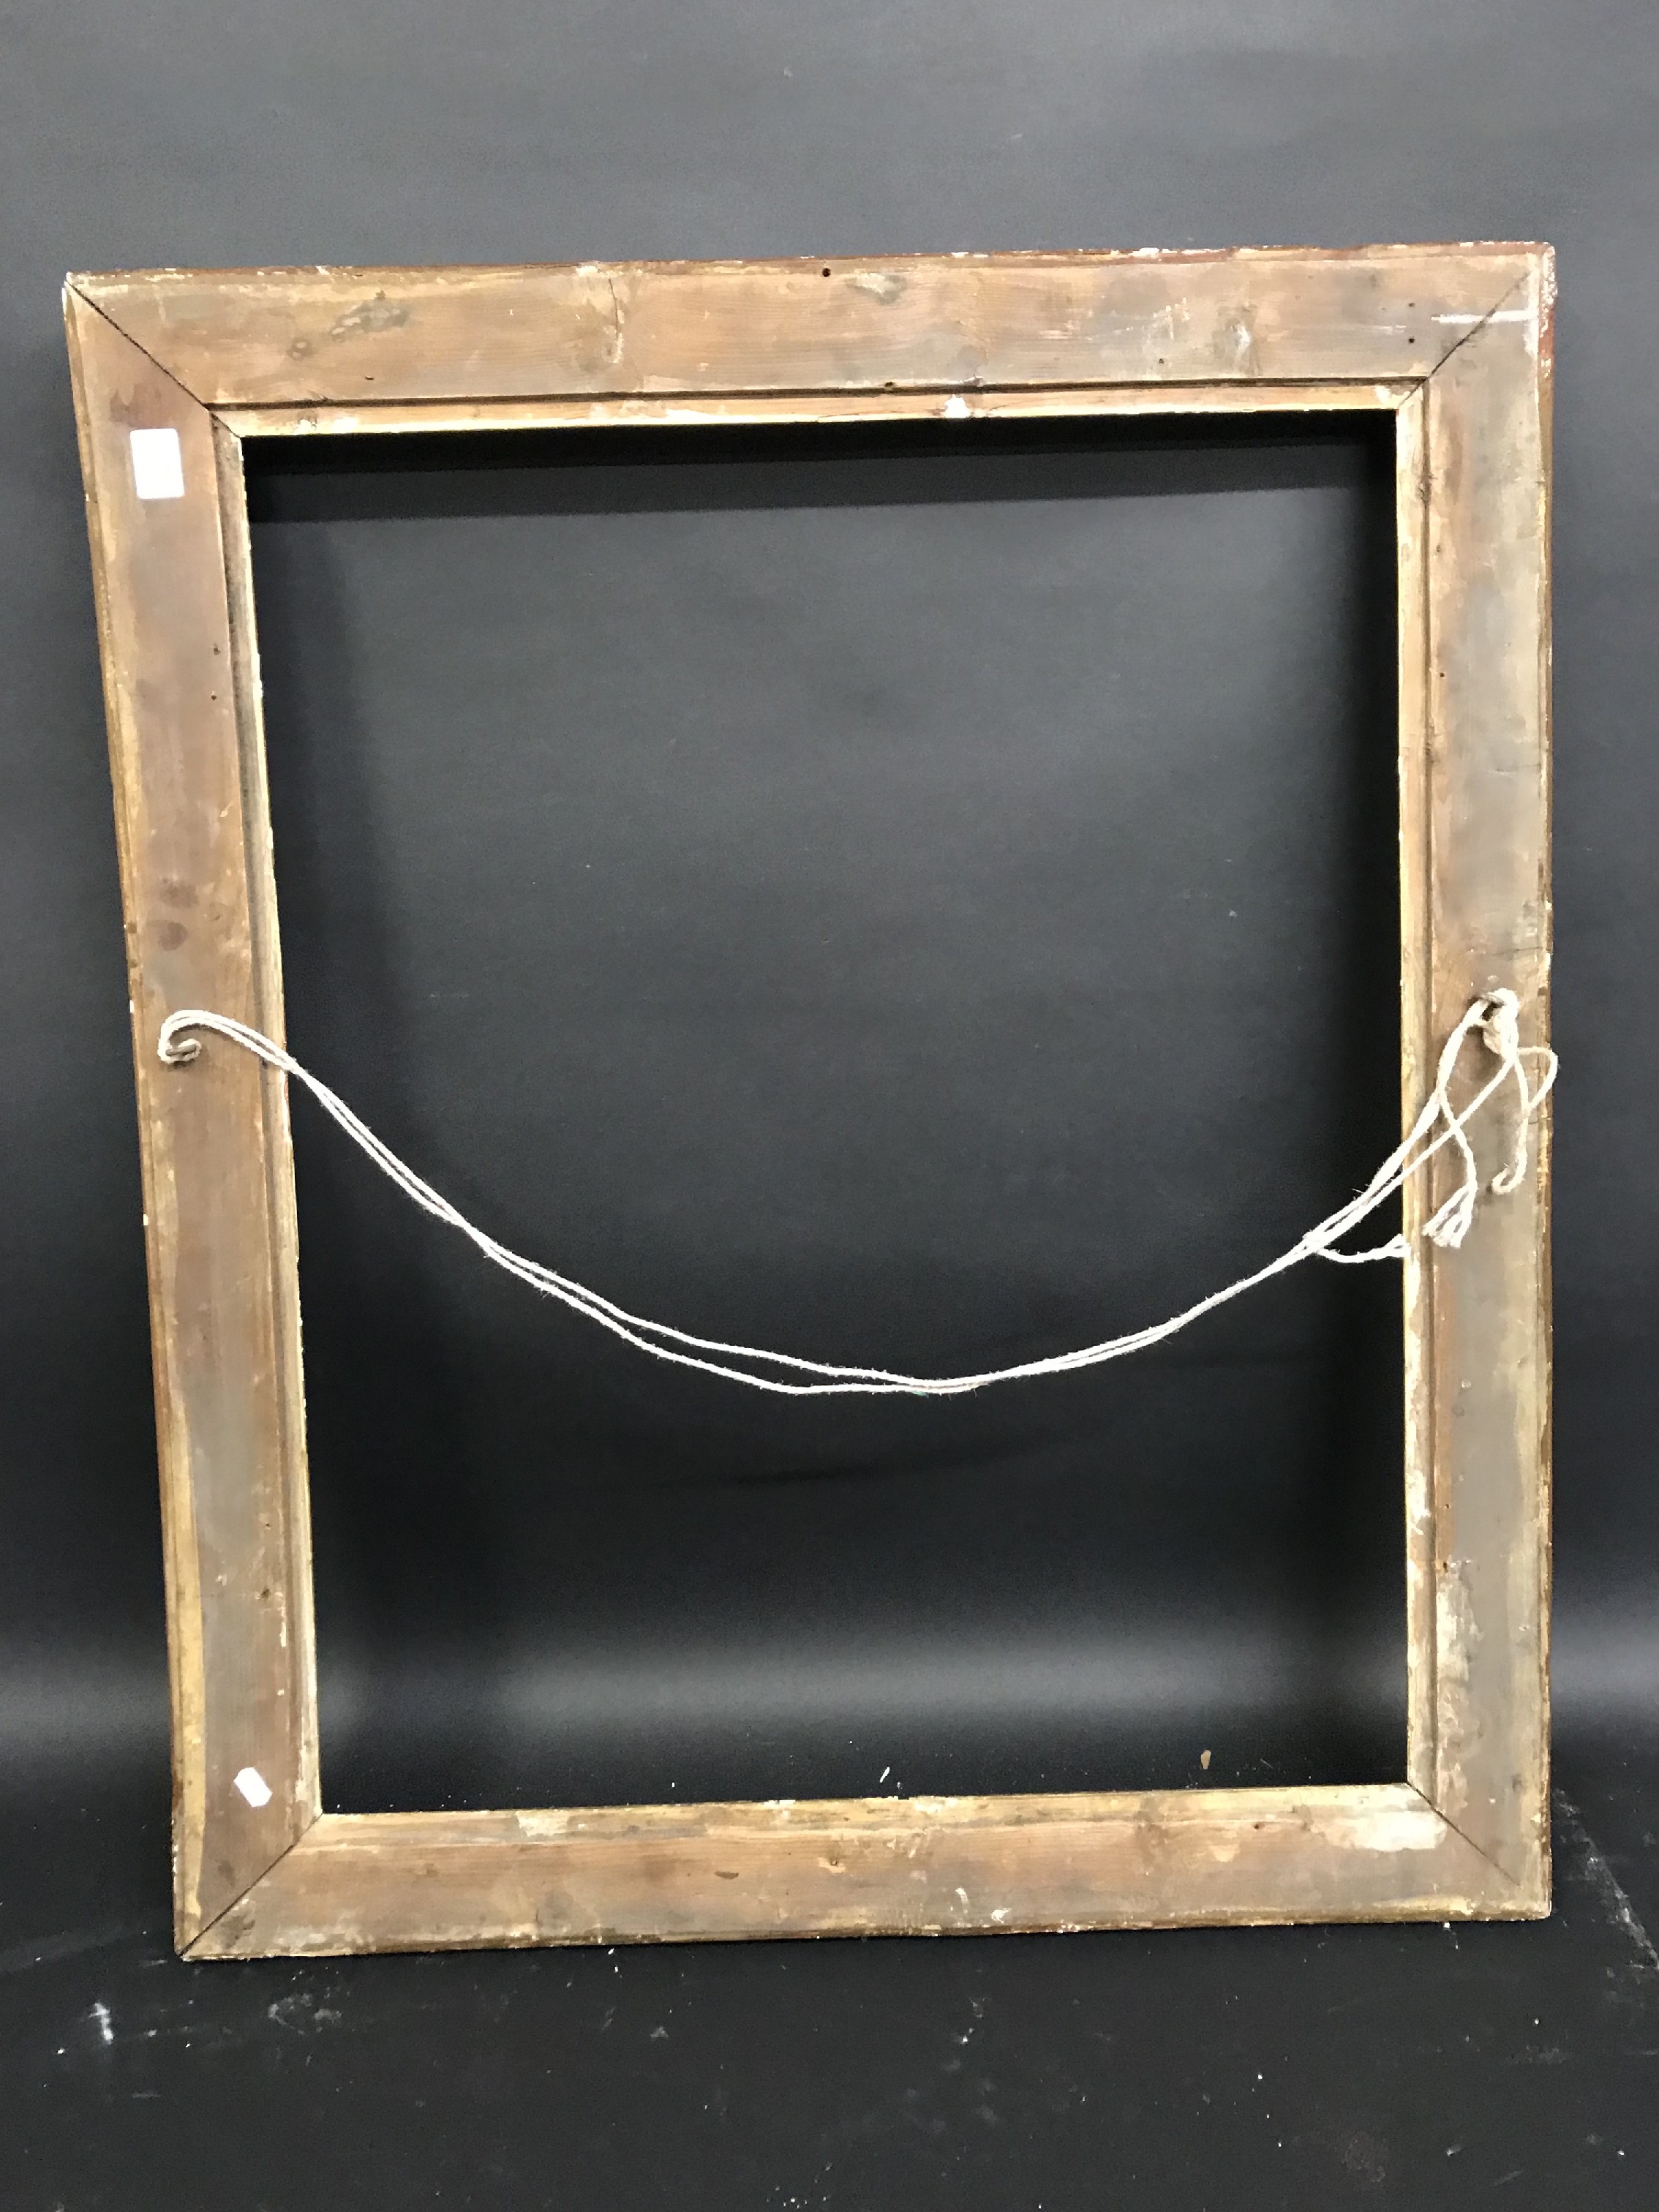 19th Century French School. An Empire Style Frame, 29" x 23.25" (rebate). - Image 3 of 3